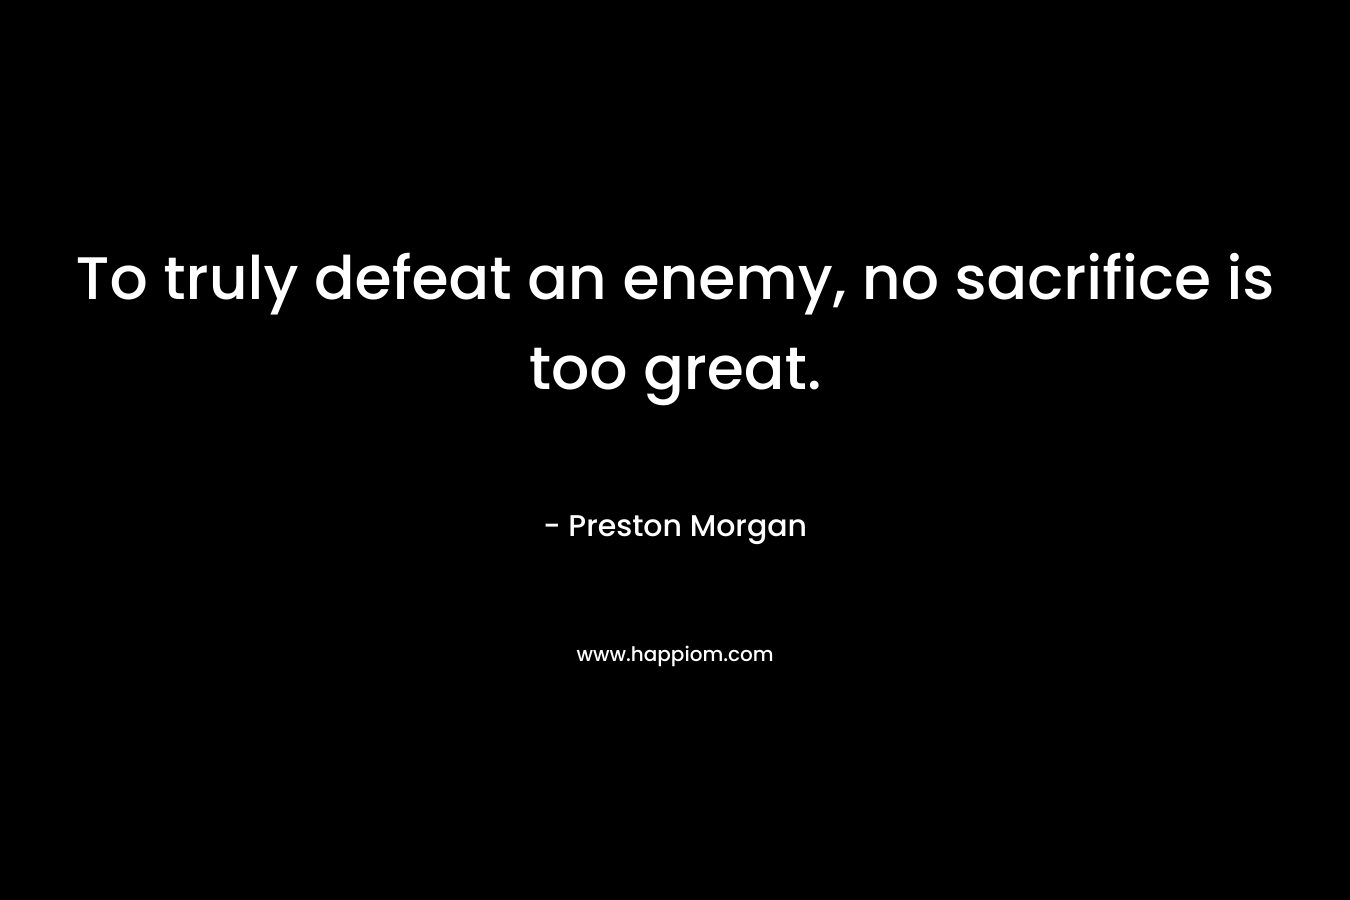 To truly defeat an enemy, no sacrifice is too great. – Preston Morgan